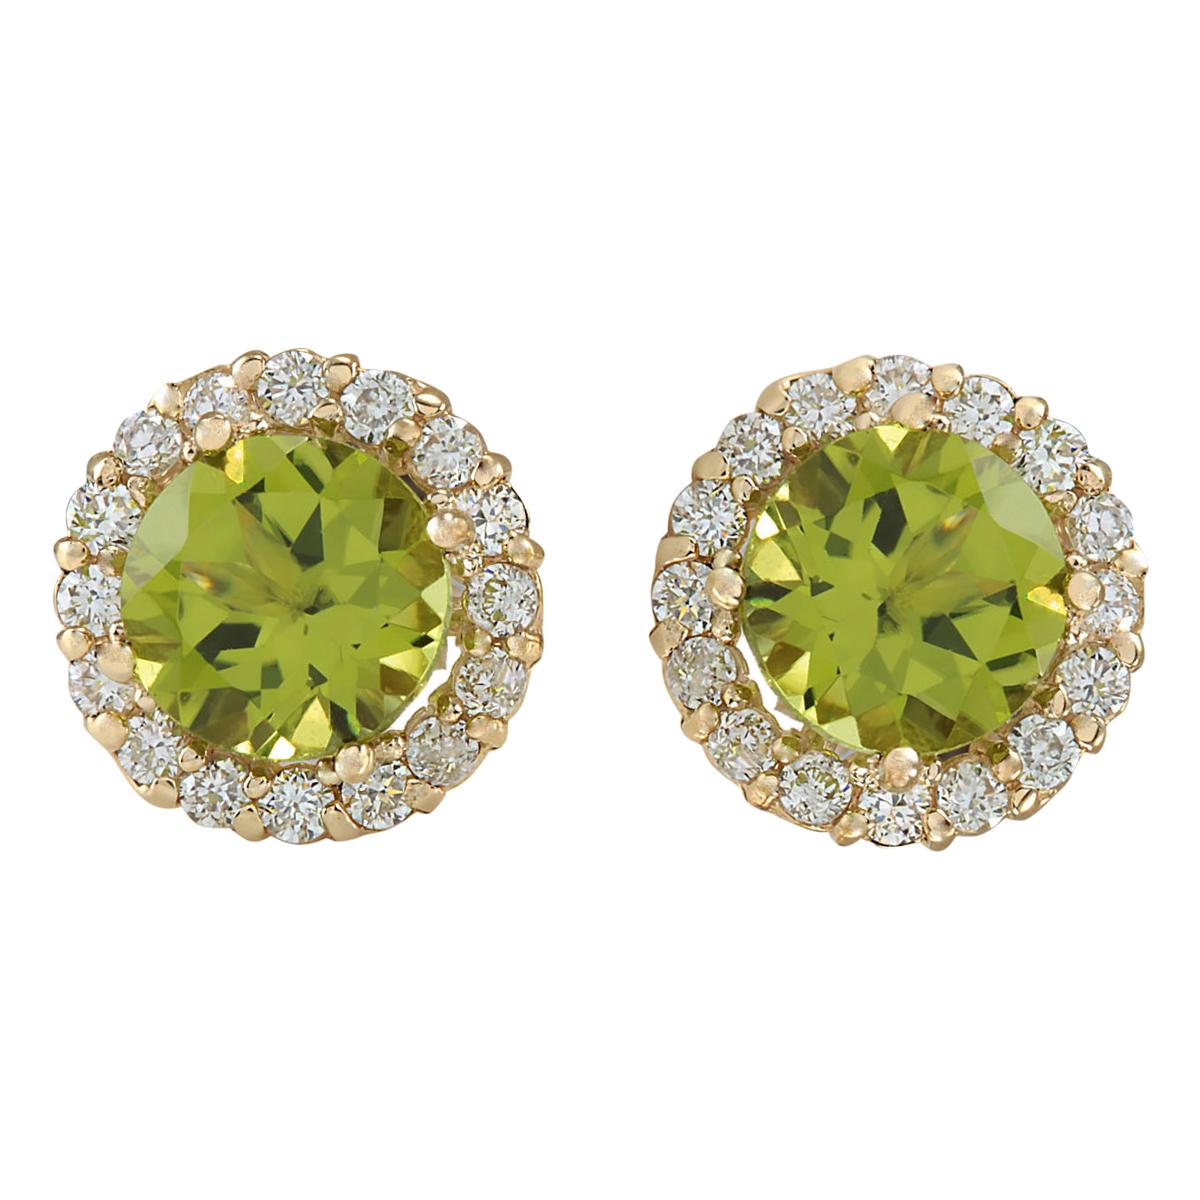 Peridot Diamond Earrings In 14 Karat Yellow Gold In New Condition For Sale In Los Angeles, CA